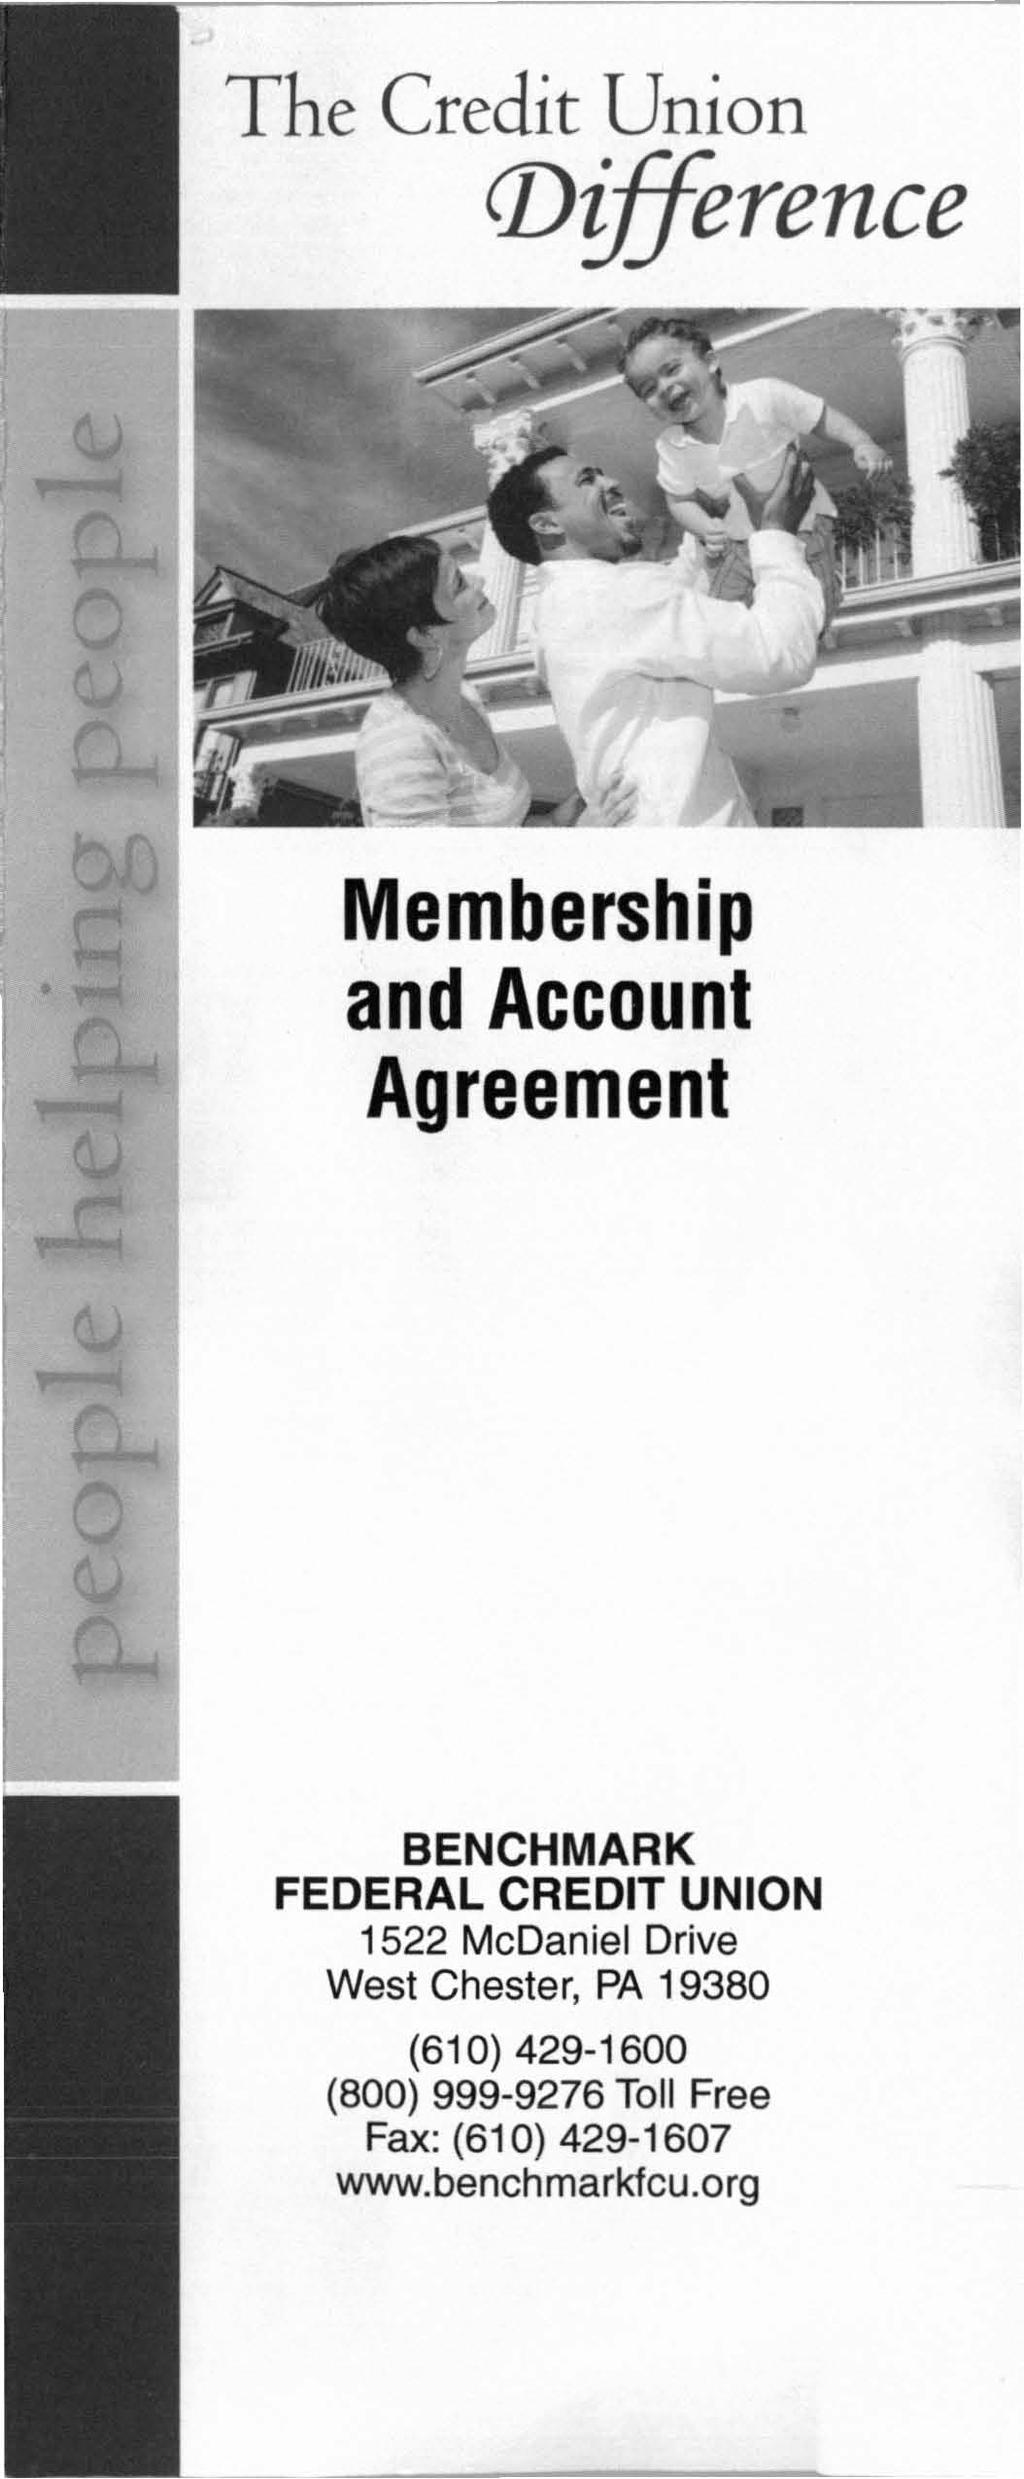 The Credit Union (j)i erence Membership and Account Agreement BENCHMARK FEDERAL CREDIT UNION 1522 McDaniel